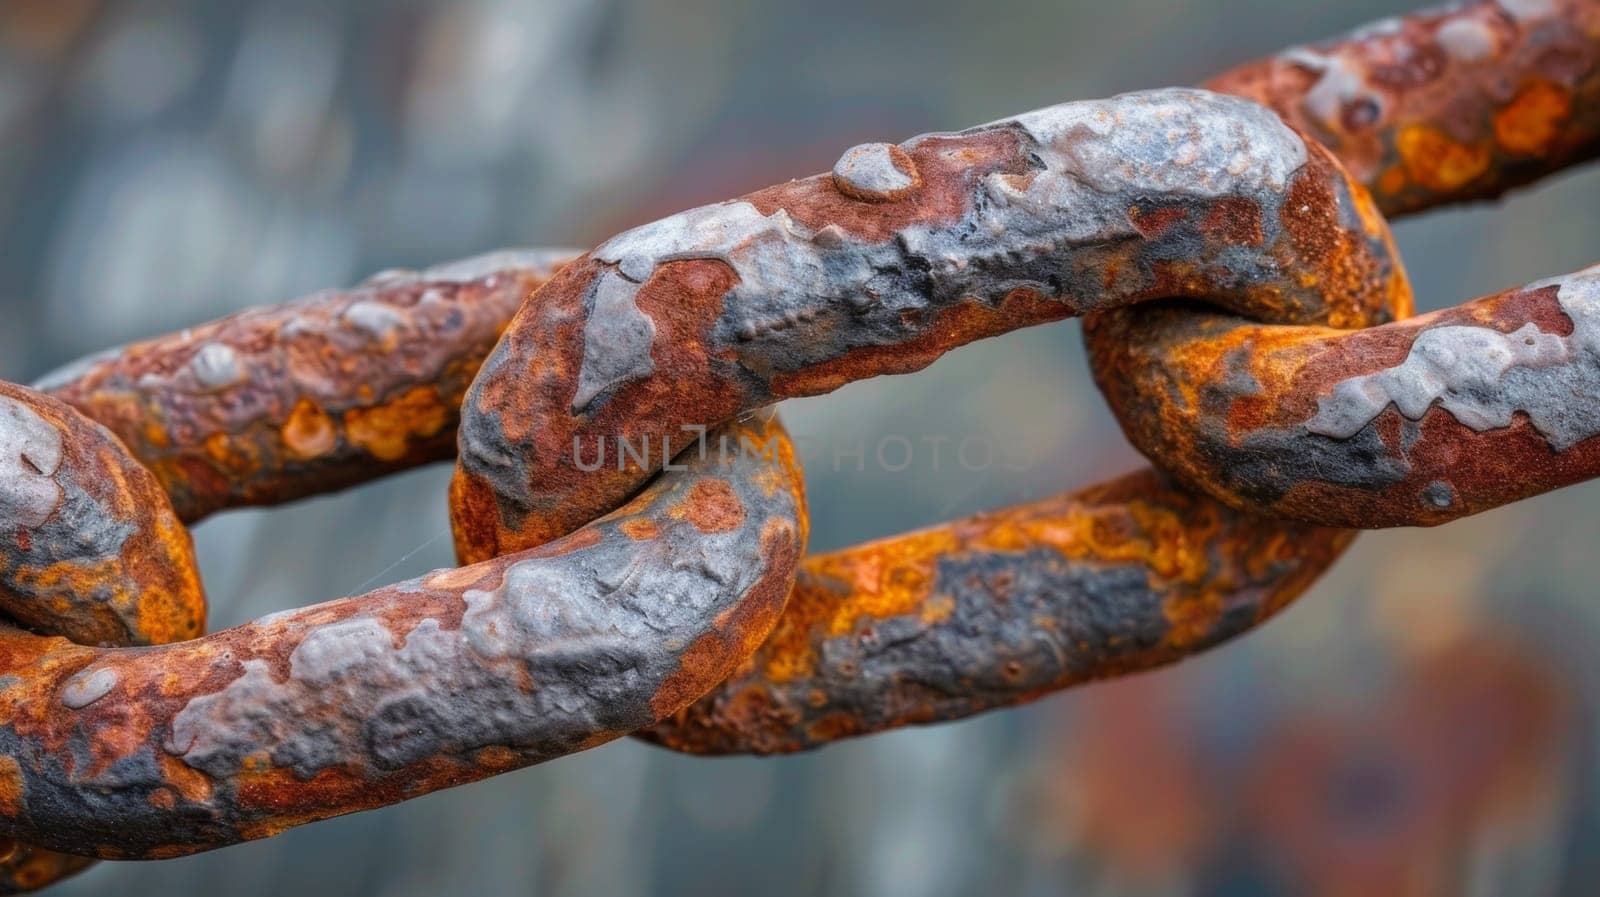 A close up of a rusty chain with rust on it